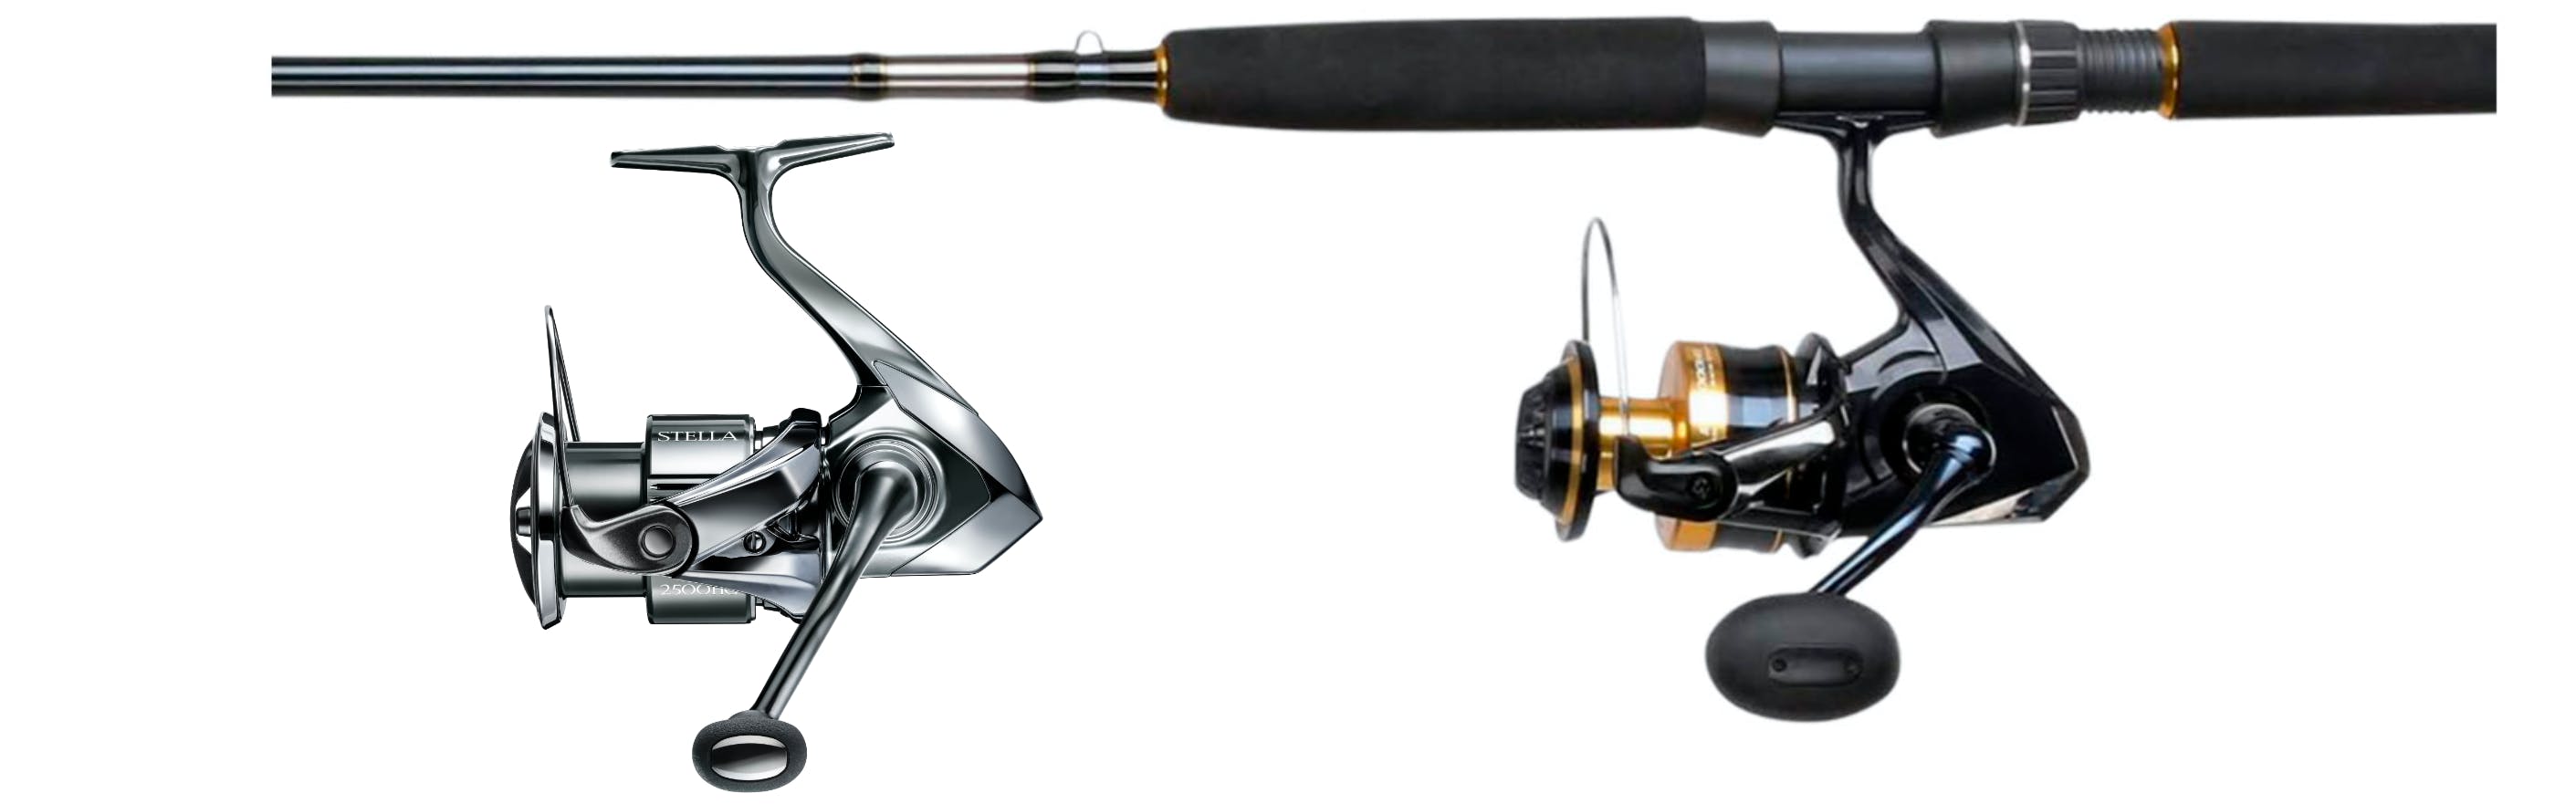 An Expert Guide to the Best Flipping Baits for Bass